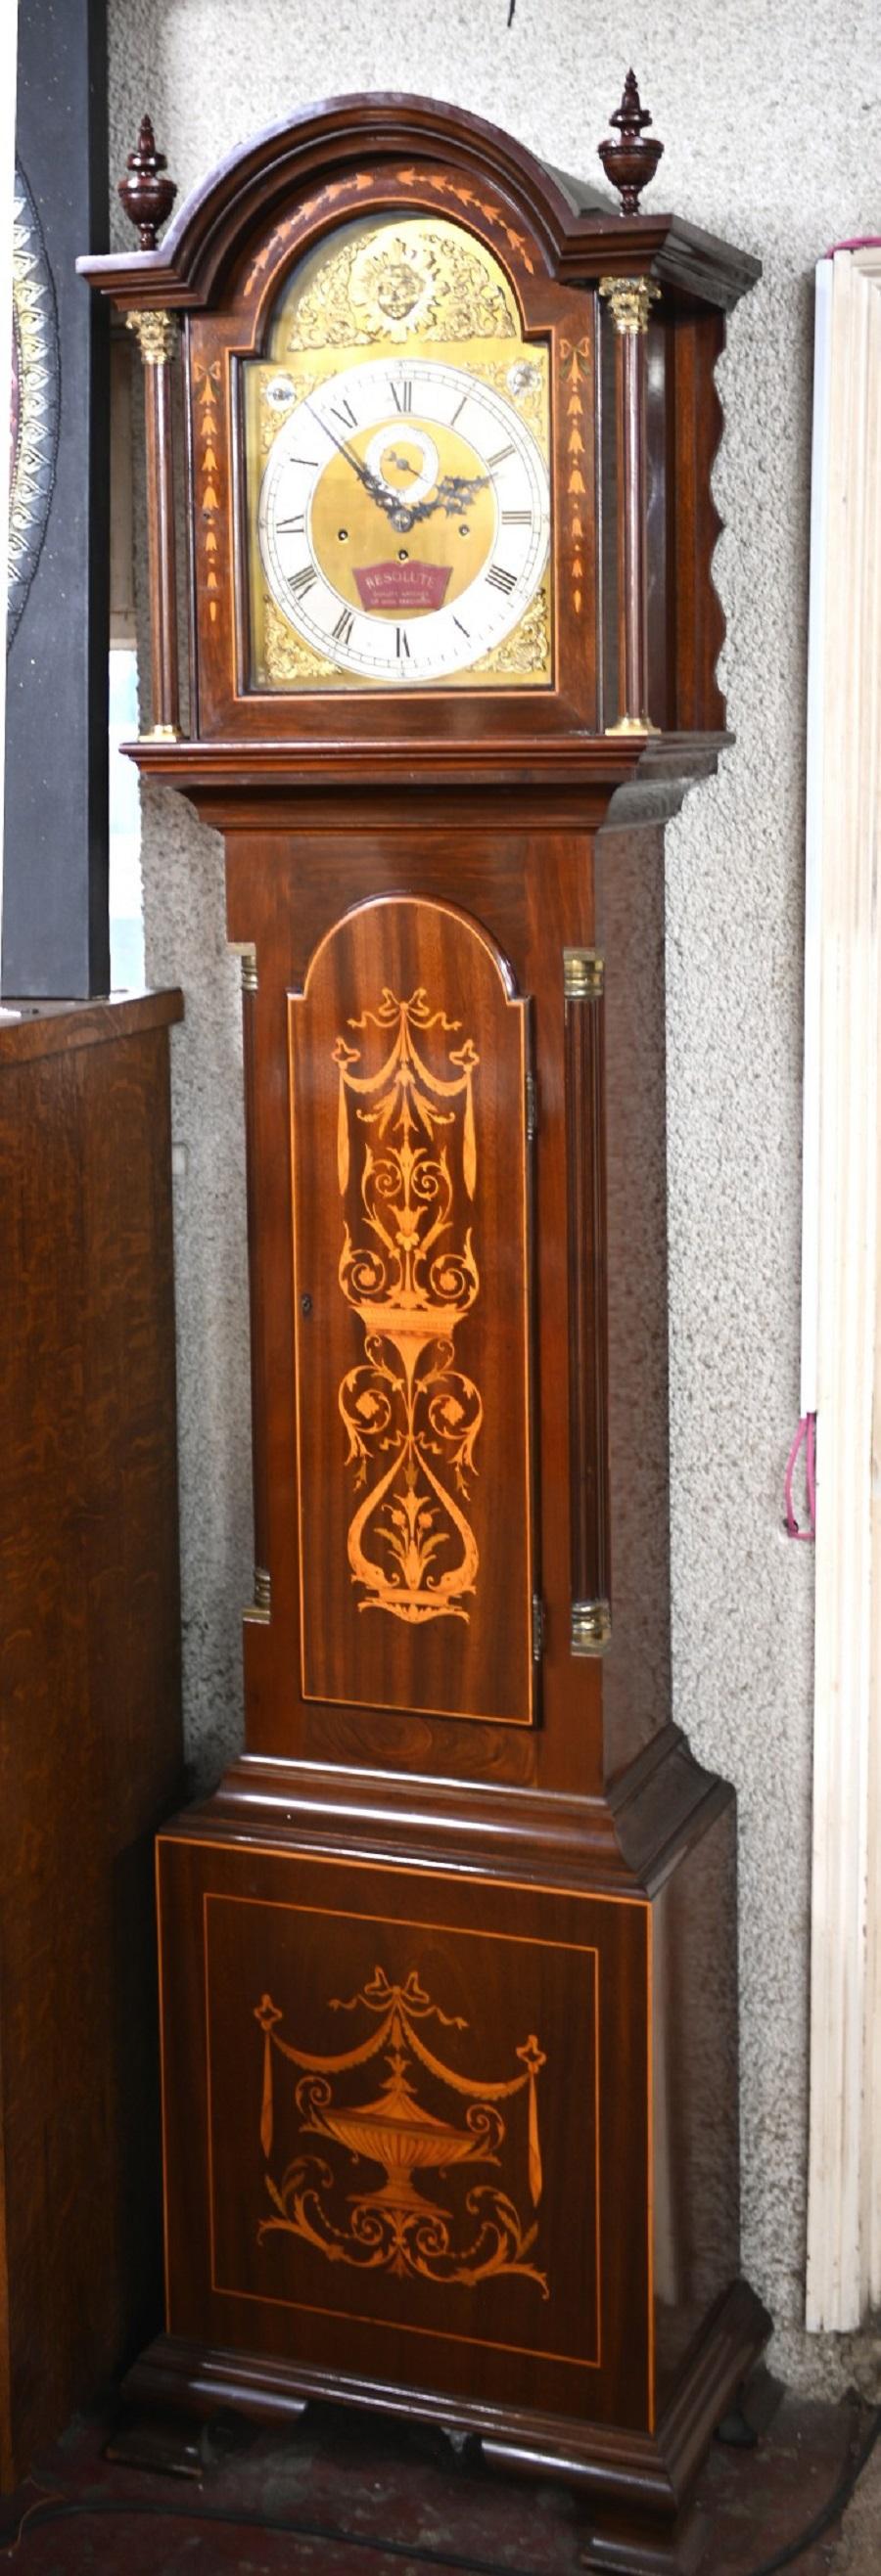 Glorious Sheraton Revival grandfather clock in mahogany
Features intricate inlay work including urns, scrolls and floral motifs to great affect
Gorgeous brass face with a sun motif and the plaque marked 'Resolute'
Surmounted by two classical urn